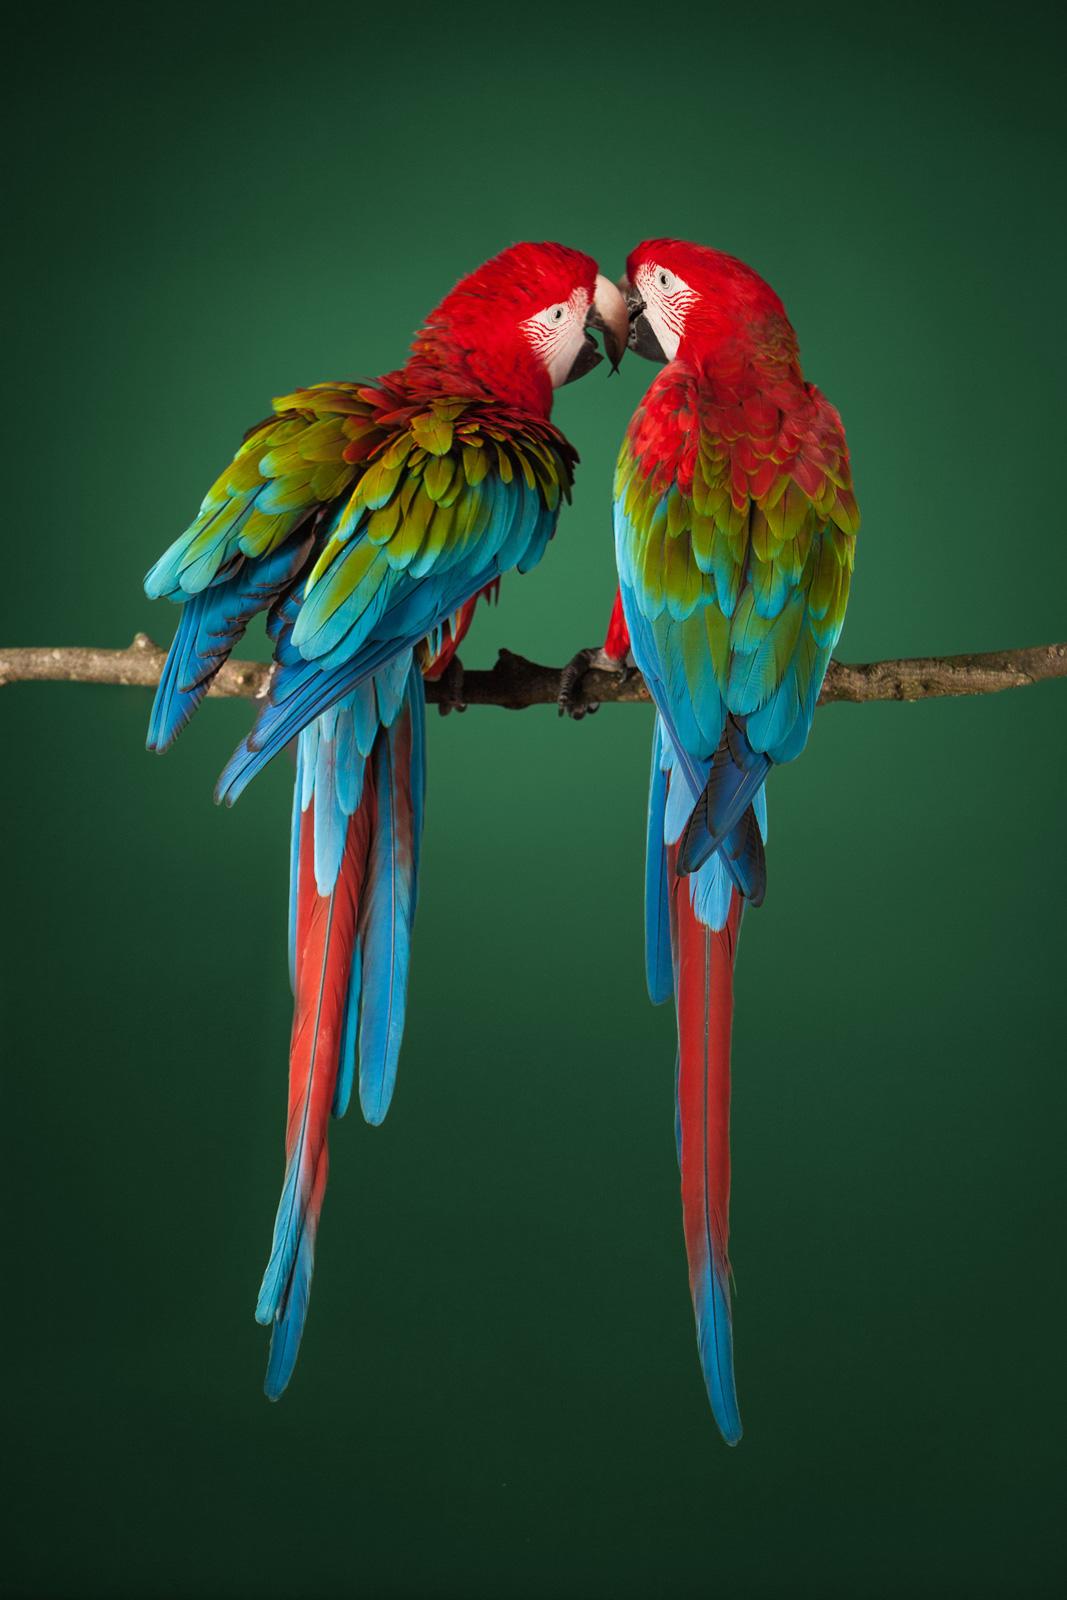 Macaw #2 - Signed limited edition nature fine art print, Contemporary photo, Bird